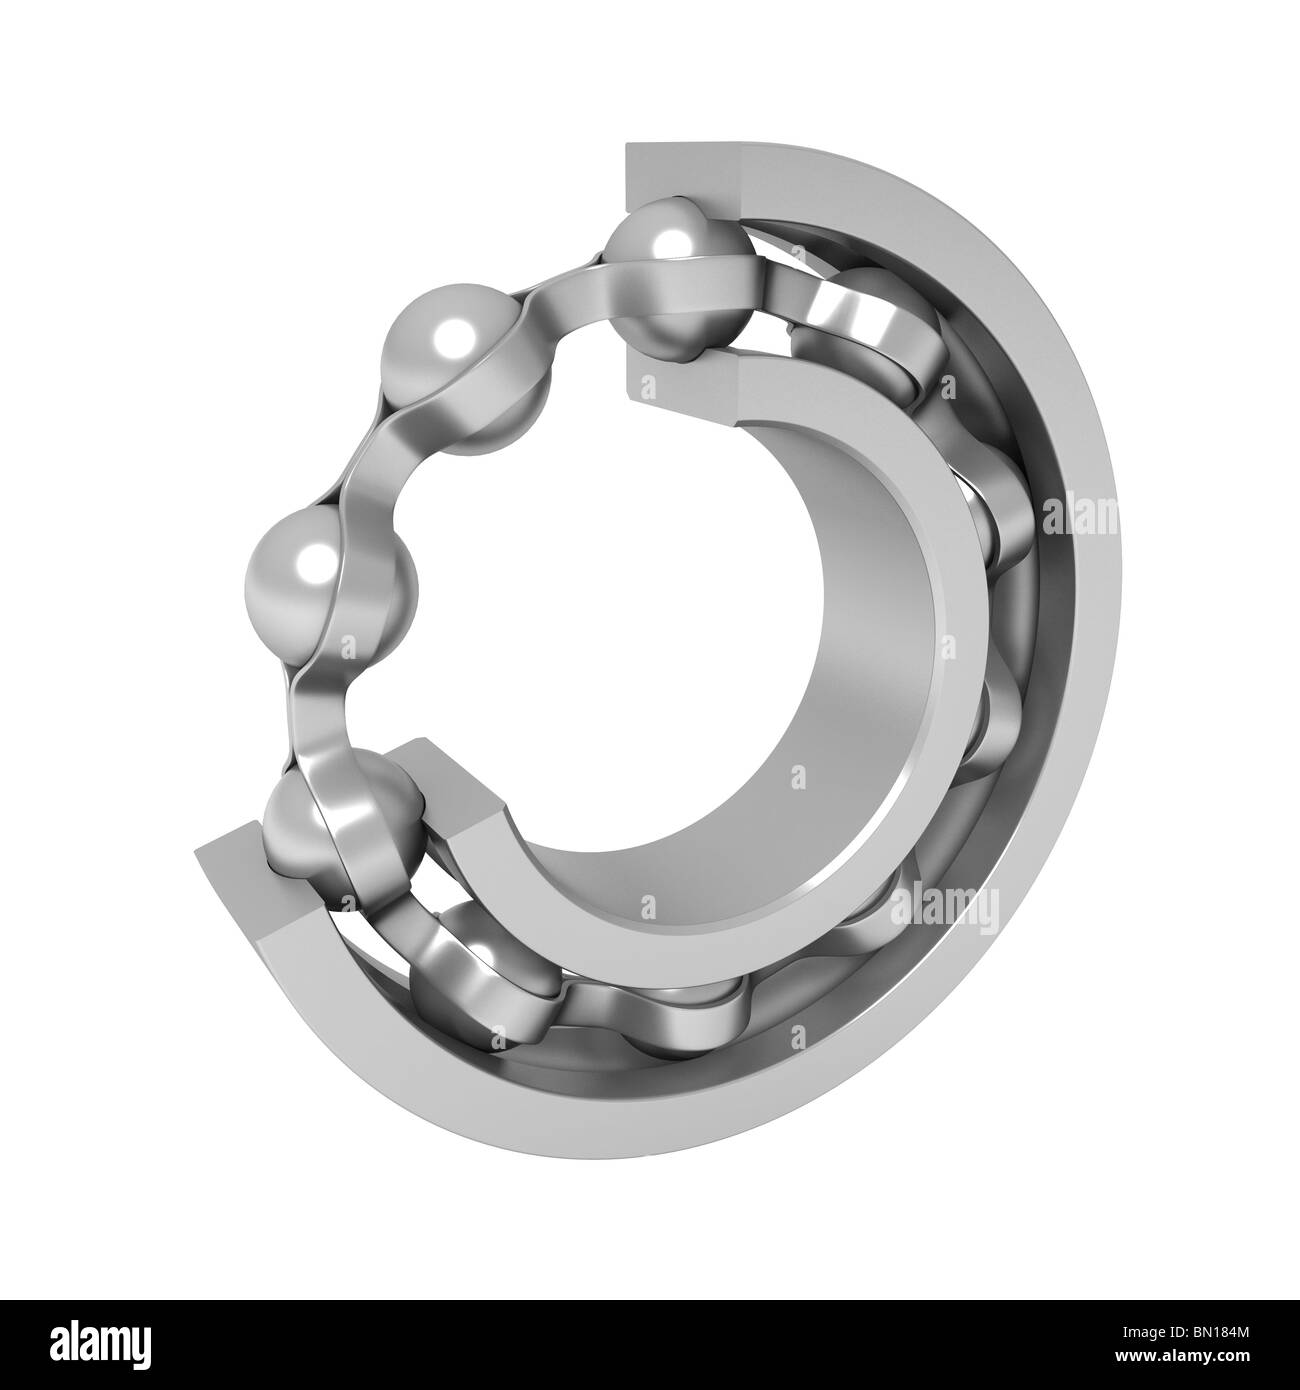 Three-dimensional model - the bearing in a cut. Stock Photo